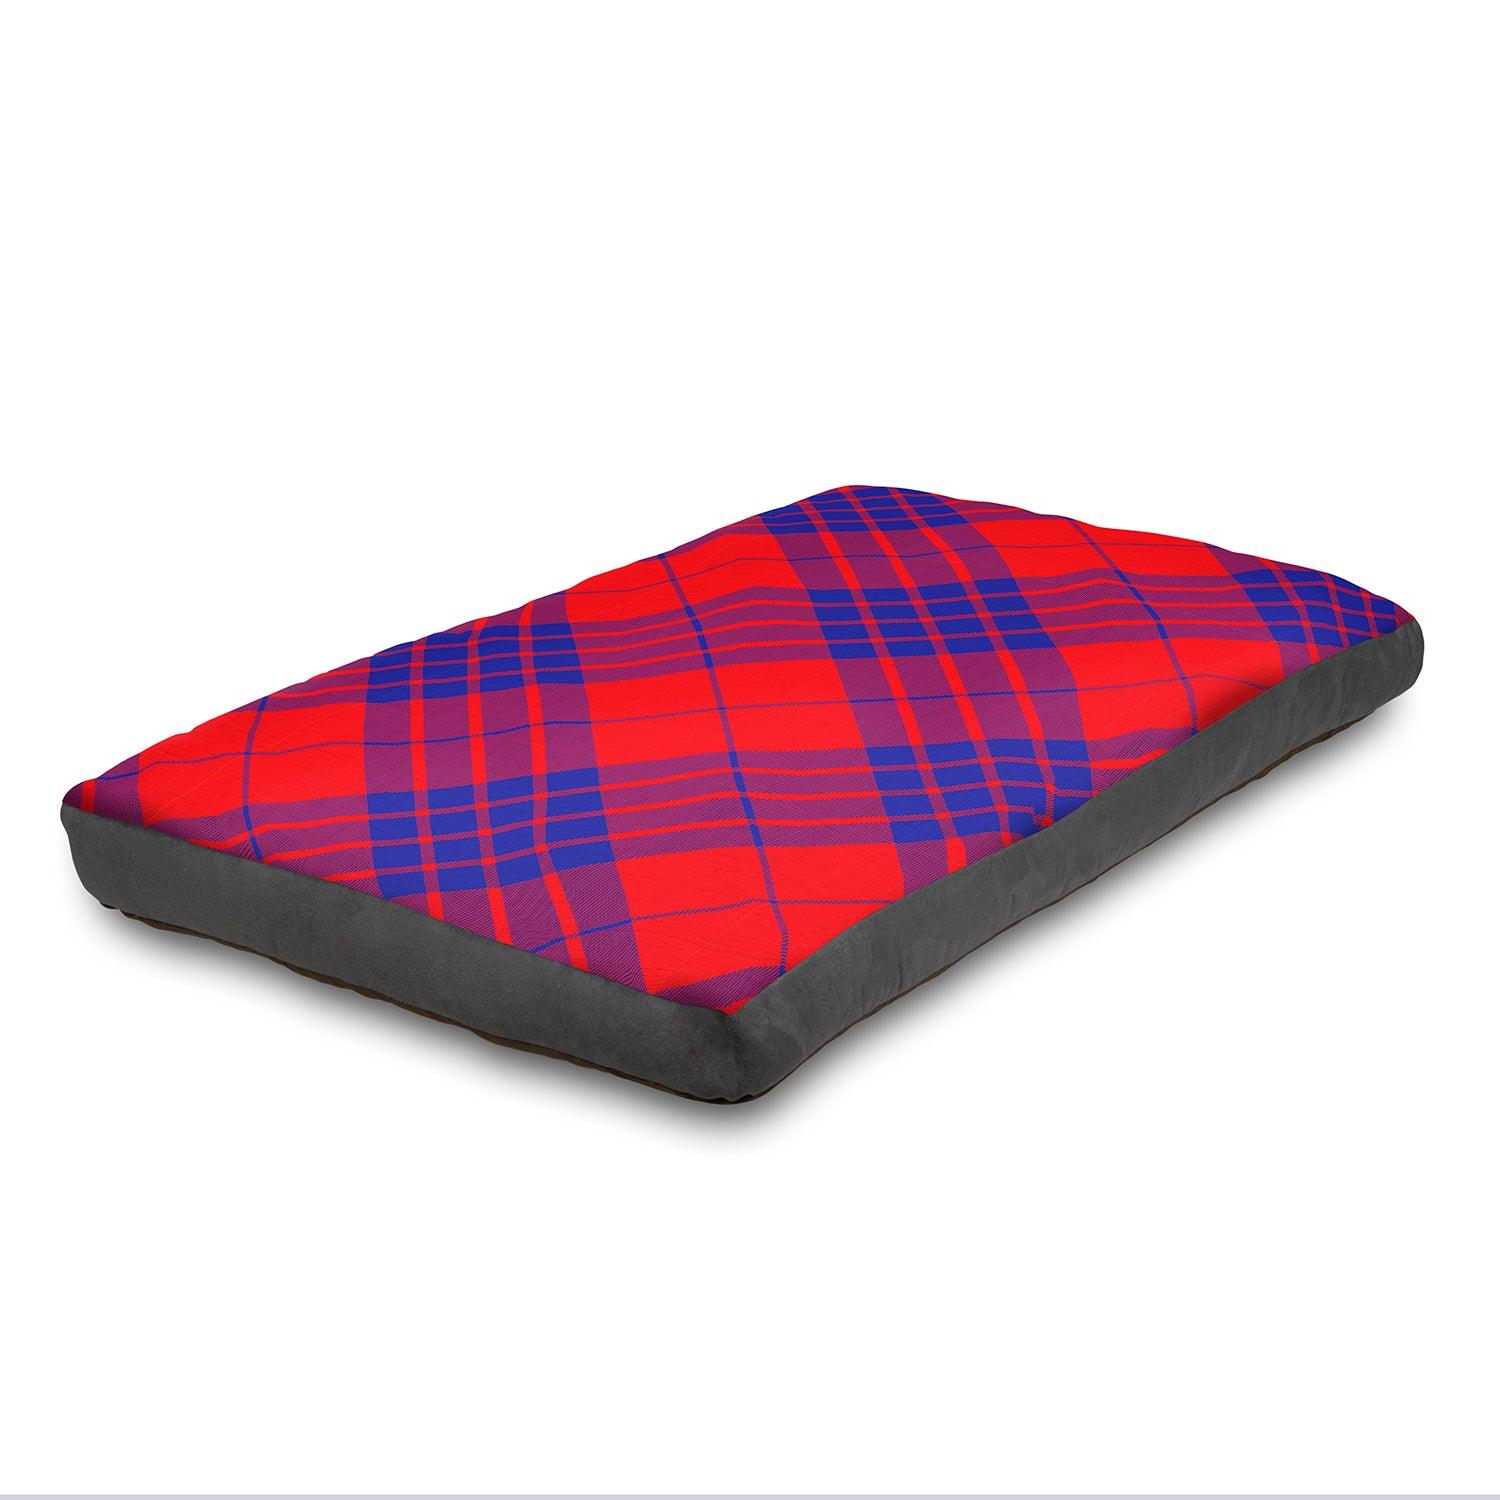 View Super Comfy Dog Bed Soft and Fluffy with Washable Cover Large 125 cm x 85 cm Red information